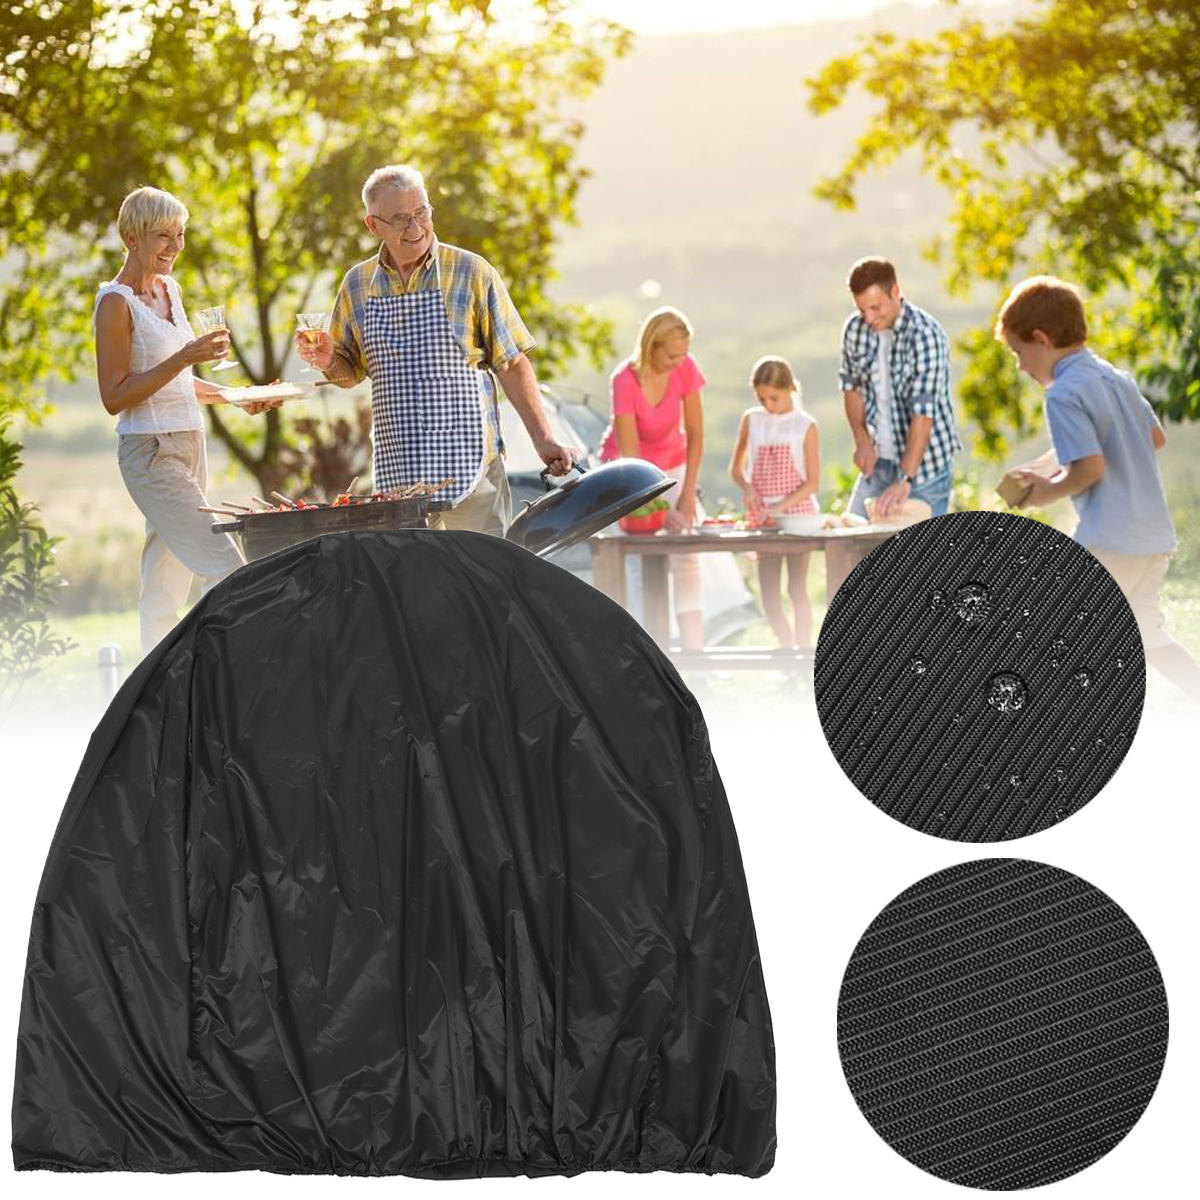 134x64.7x149.3cm BBQ Grill Cover Outdoor Camping Picnic Waterproof Dust Rain UV Proof Protector Barbeque Accessories